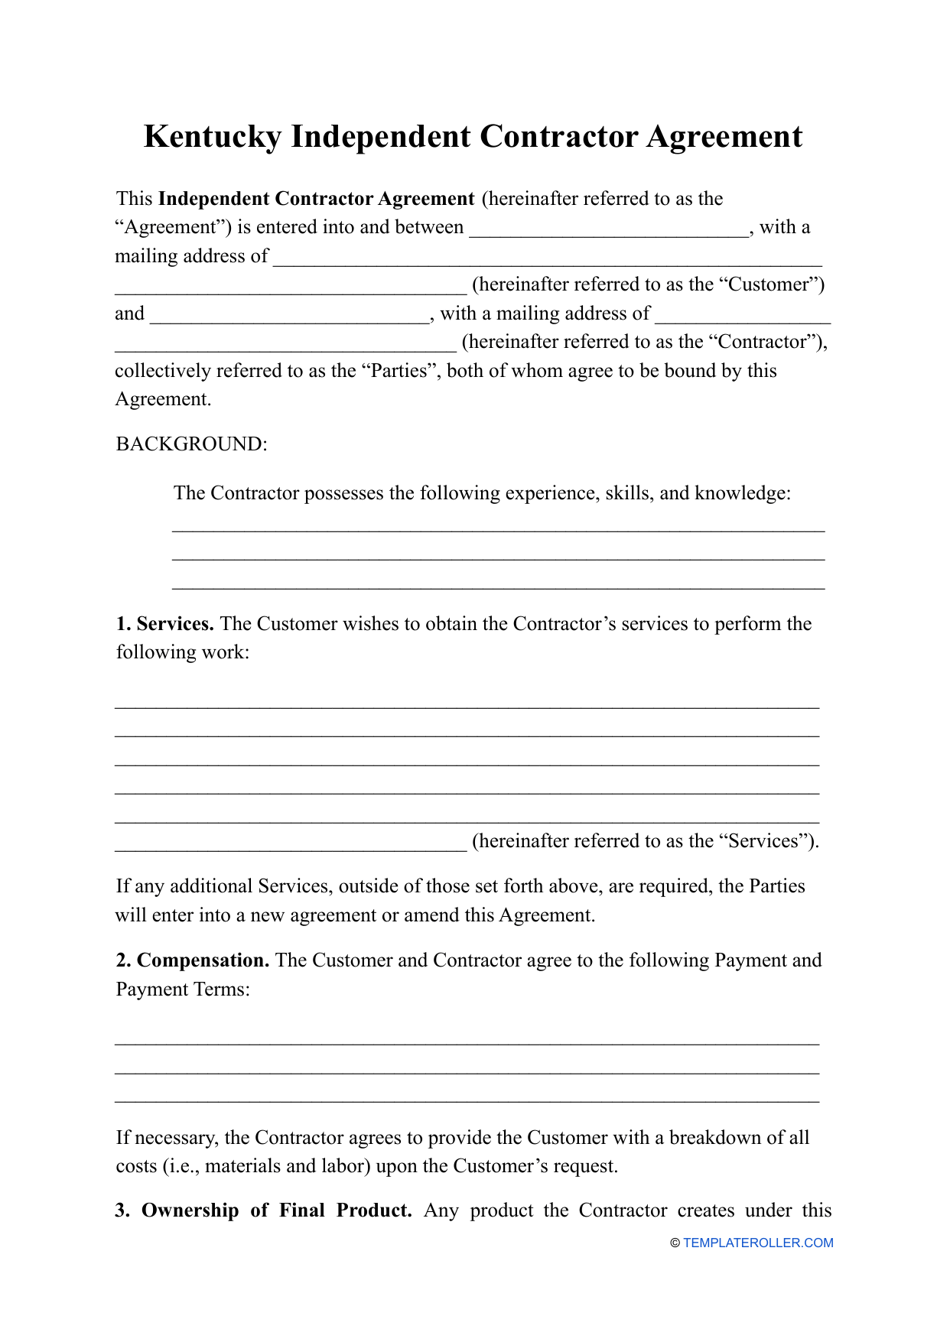 Independent Contractor Agreement Template - Kentucky, Page 1